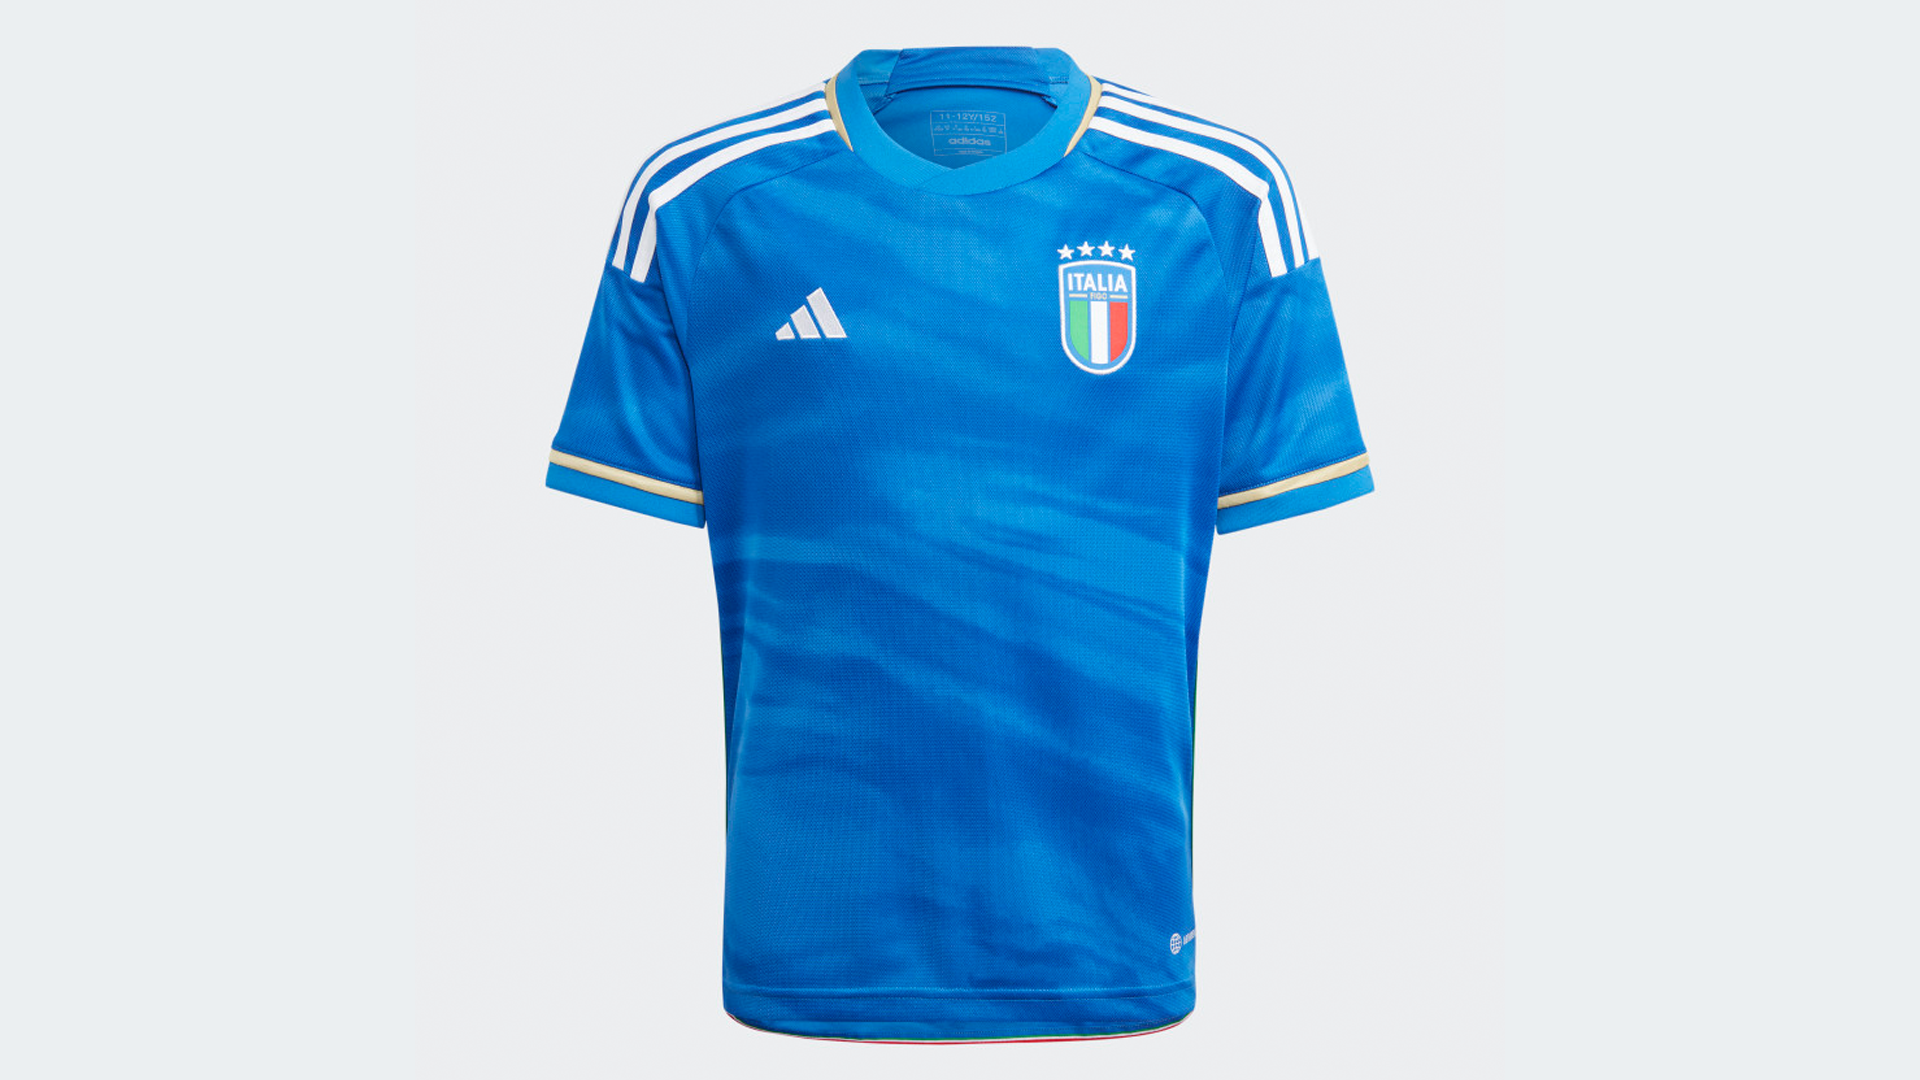 Adidas to Manufacture Italian National Team Kits Starting in 2023 –  SportsLogos.Net News